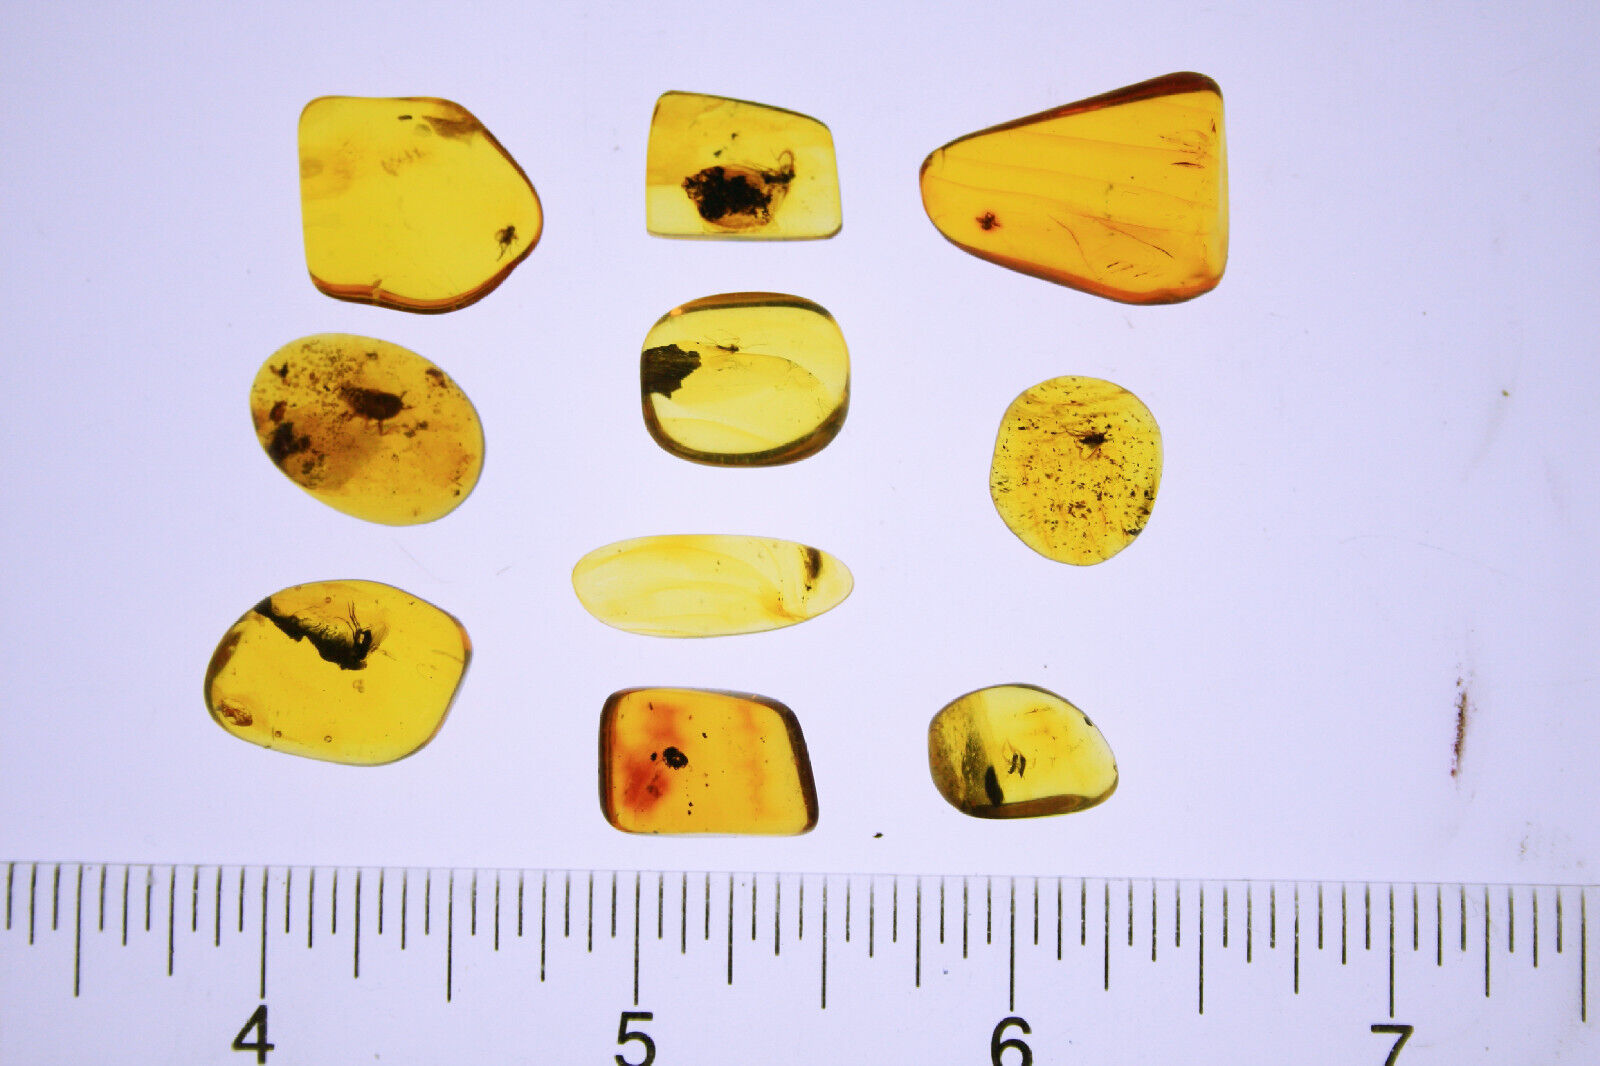 10 Pieces of Amber each with an Insect Inclusion Millions of Years Old